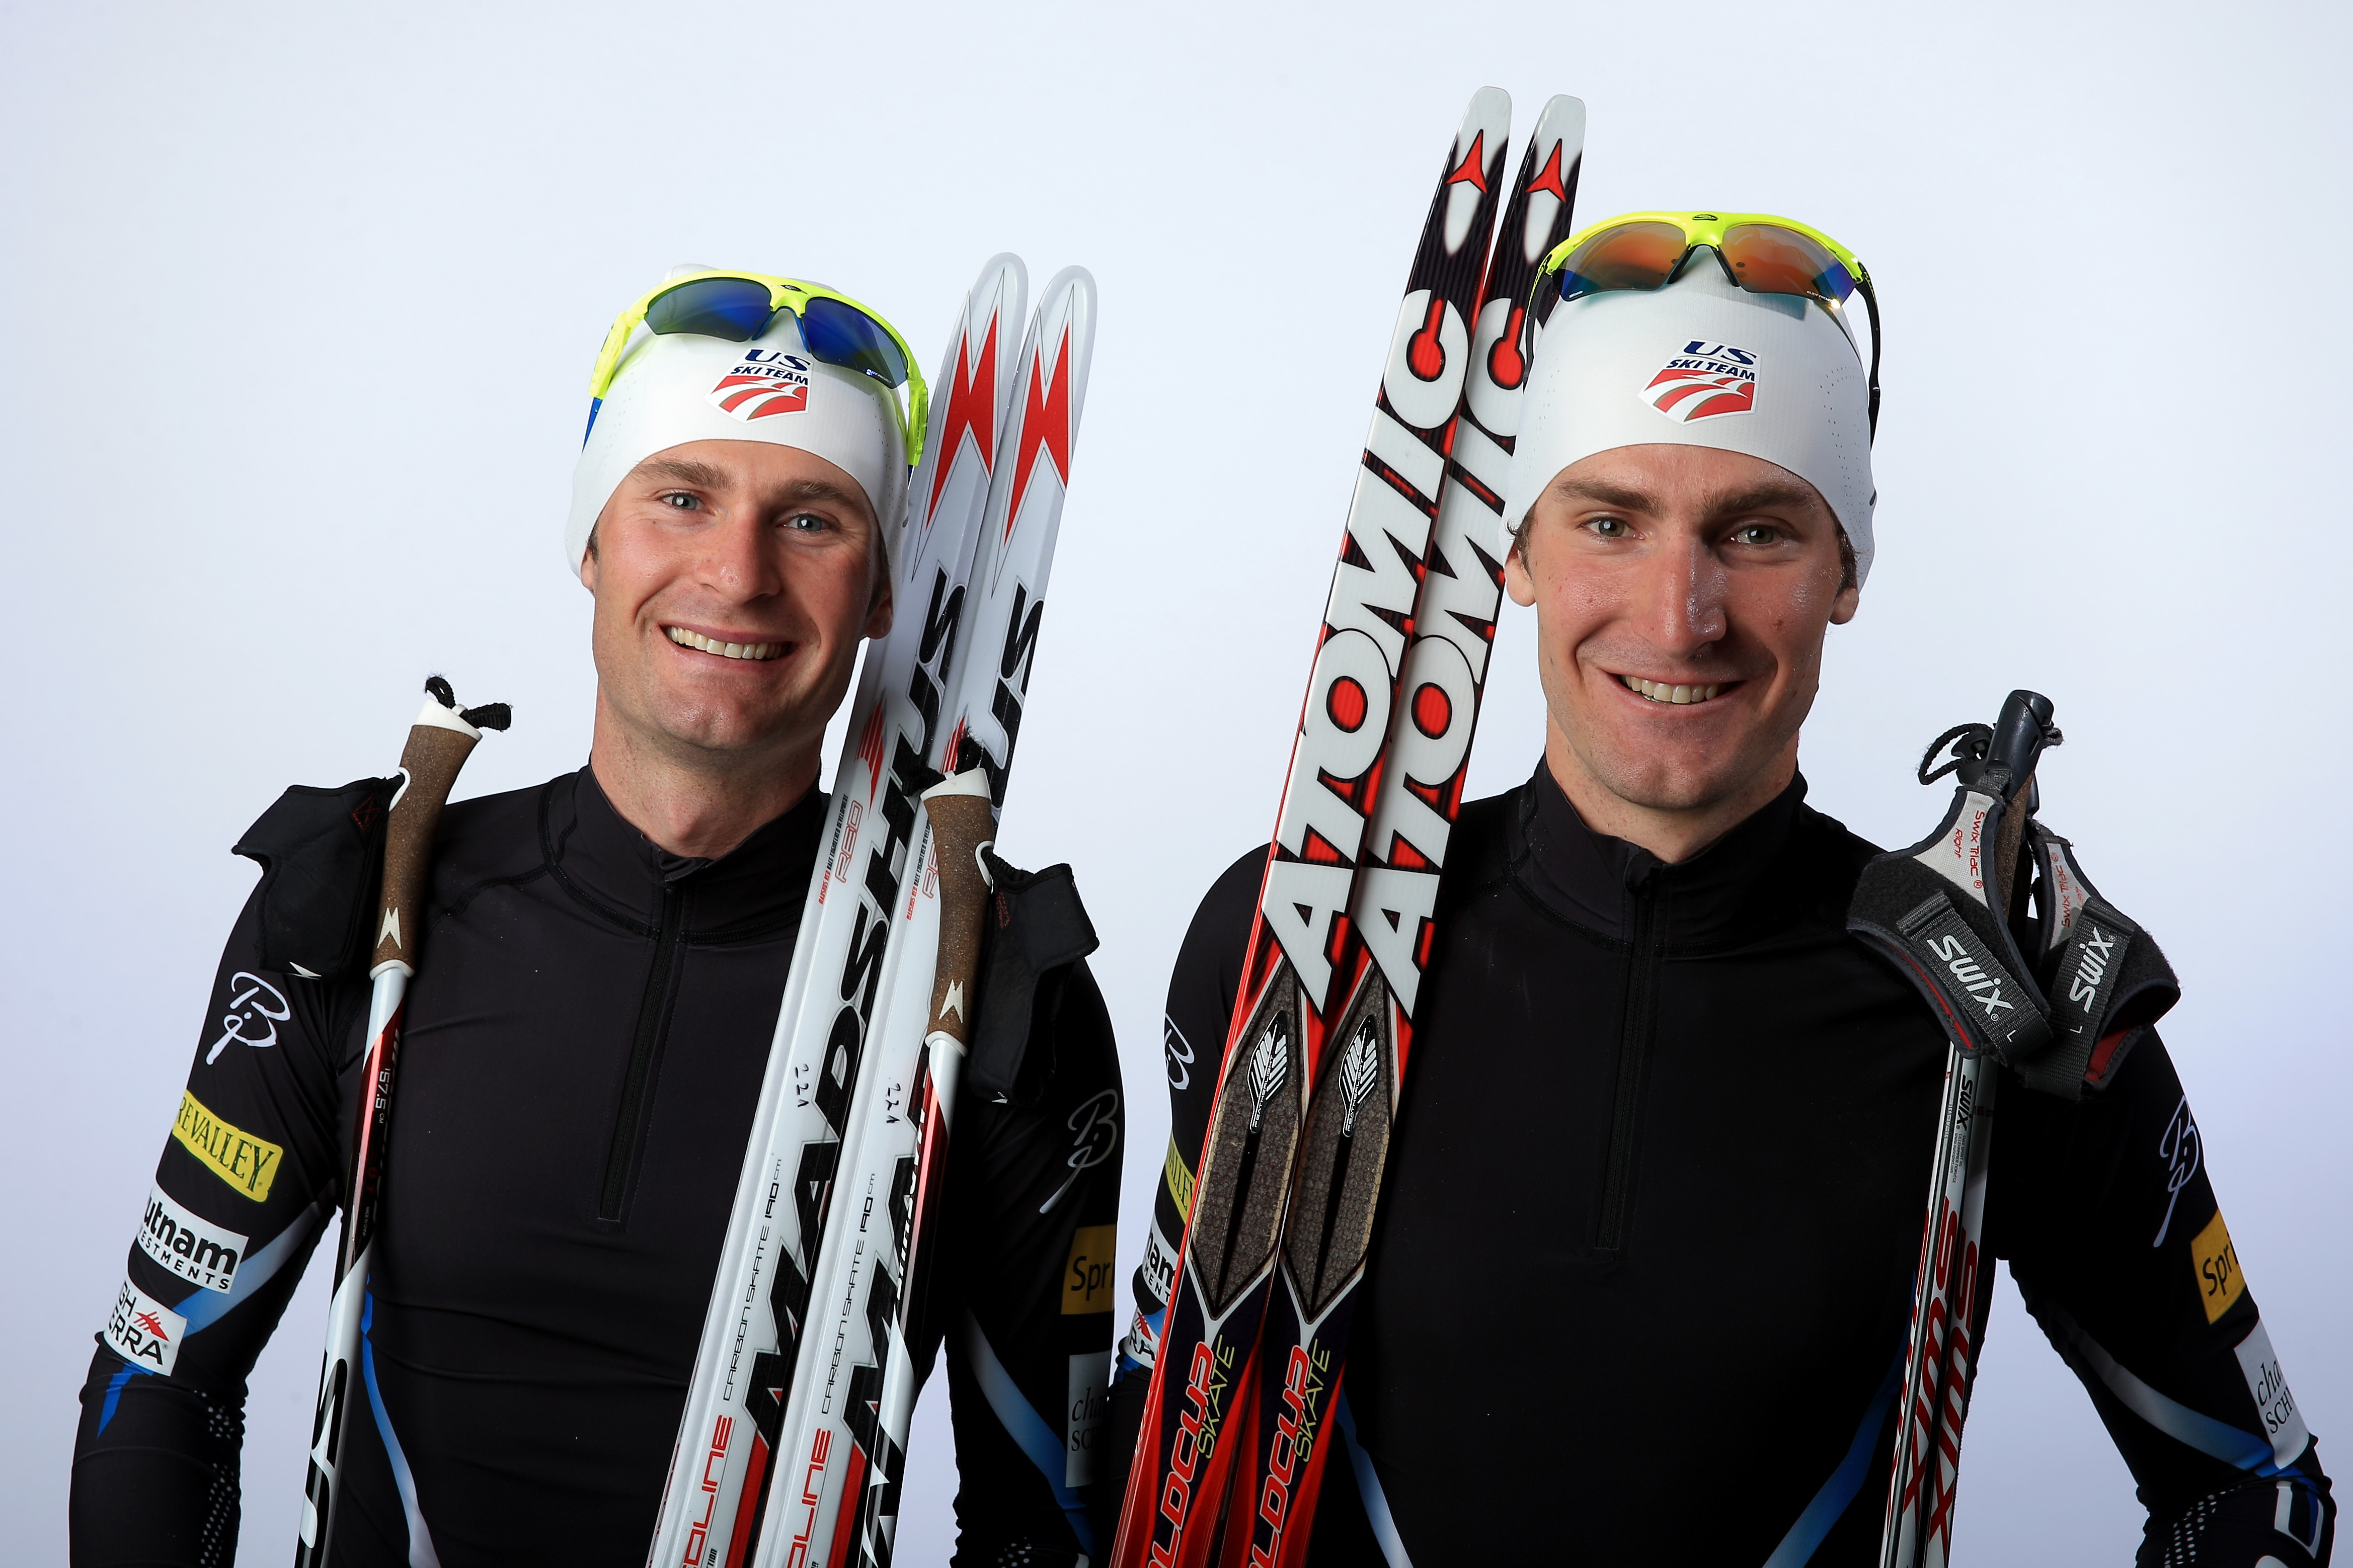 Nordic combined athletes Bryan Fletcher and Taylor Fletcher pose for a portrait during the USOC Media Summit ahead of the Sochi 2014 Winter Olympics on September 29, 2013 in Park City, Utah. Doug Pensinger—Getty Images. (Doug Pensinger—Getty Images.)